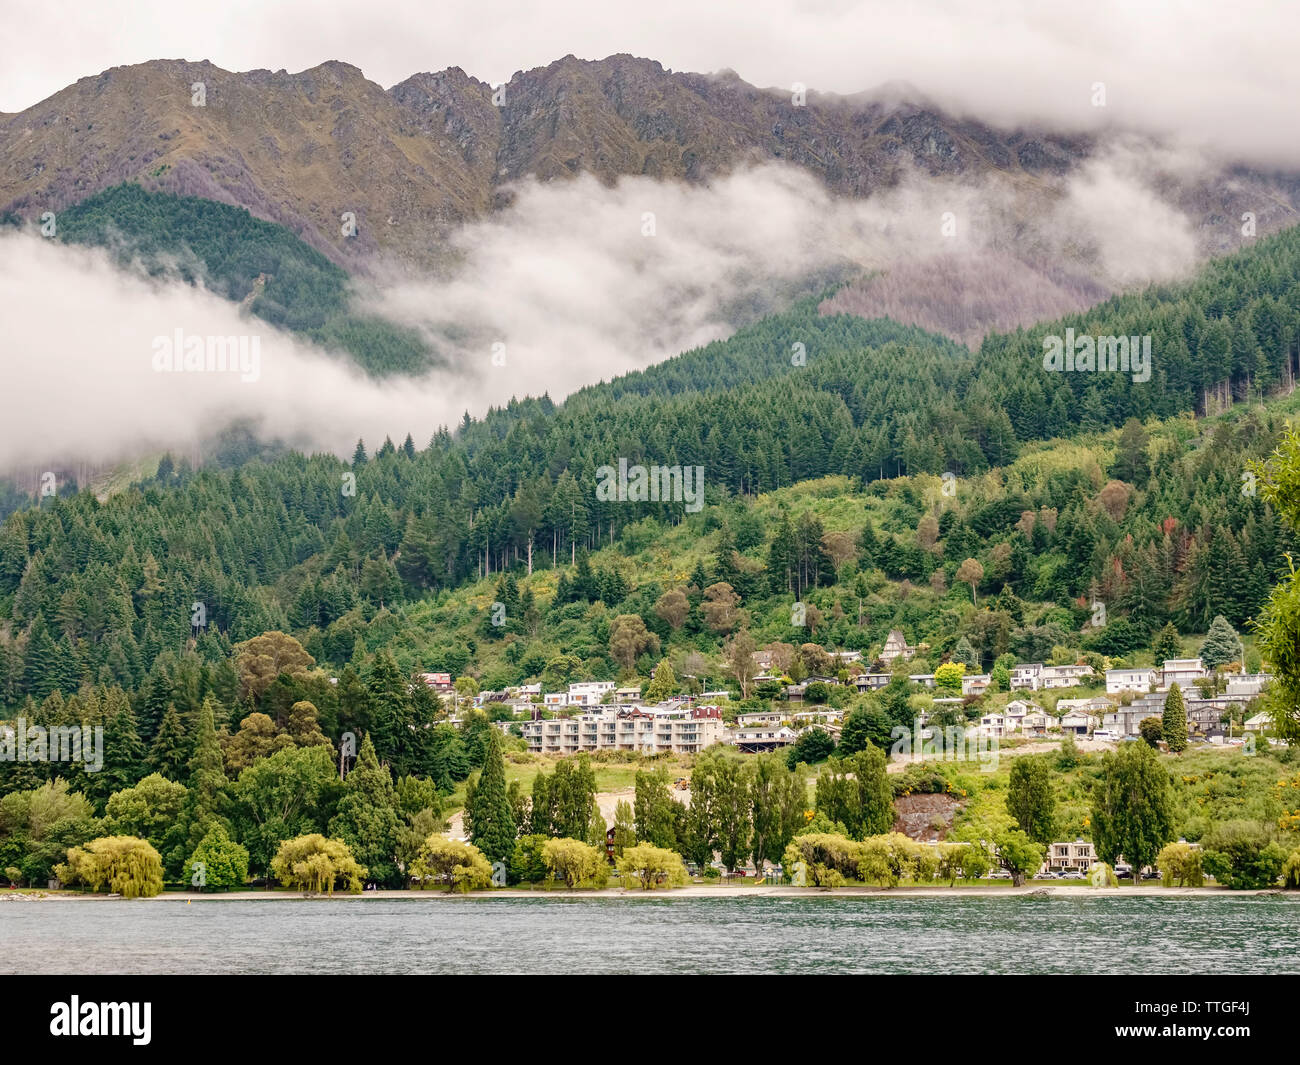 Lakeside residential area of Queenstown, New Zealand, on a drizzly day Stock Photo